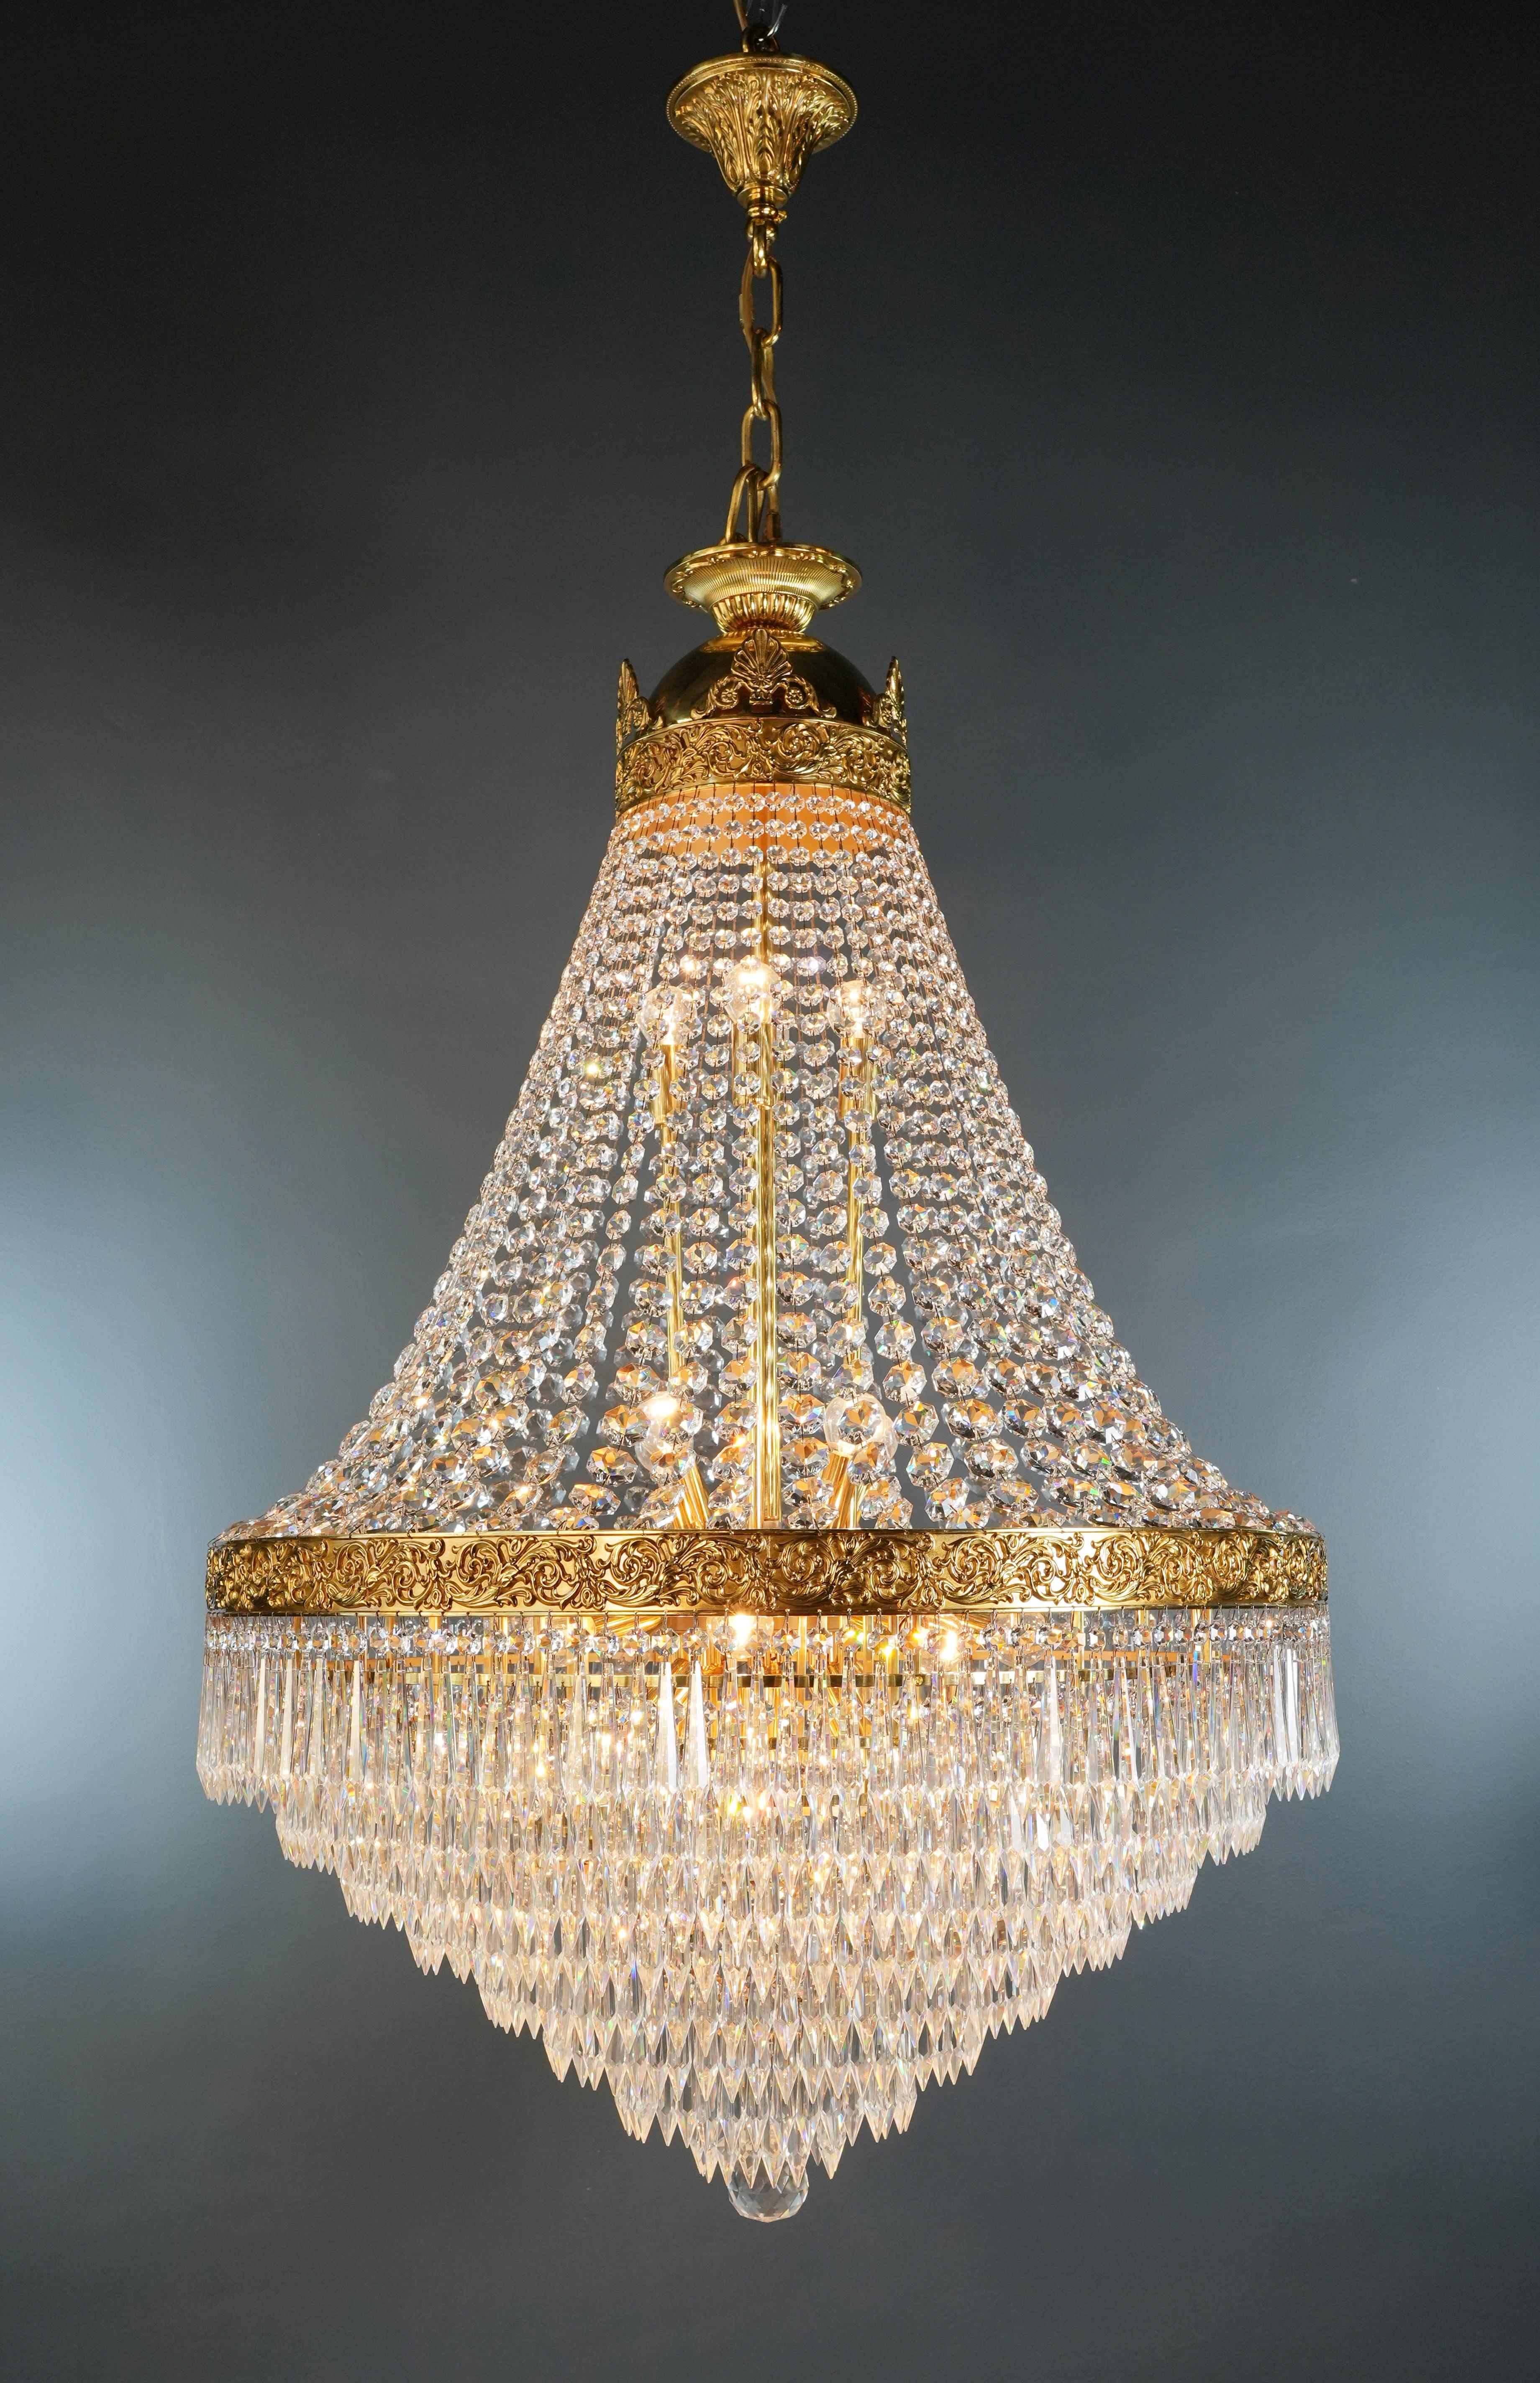 Introducing a stunning Brass Basket Empire Sac-a-Pearl Chandelier, an exquisite piece adorned with mesmerizing crystals, evoking the classic style of the Empire era. This is a new reproduction and there are several available to ensure you can bring